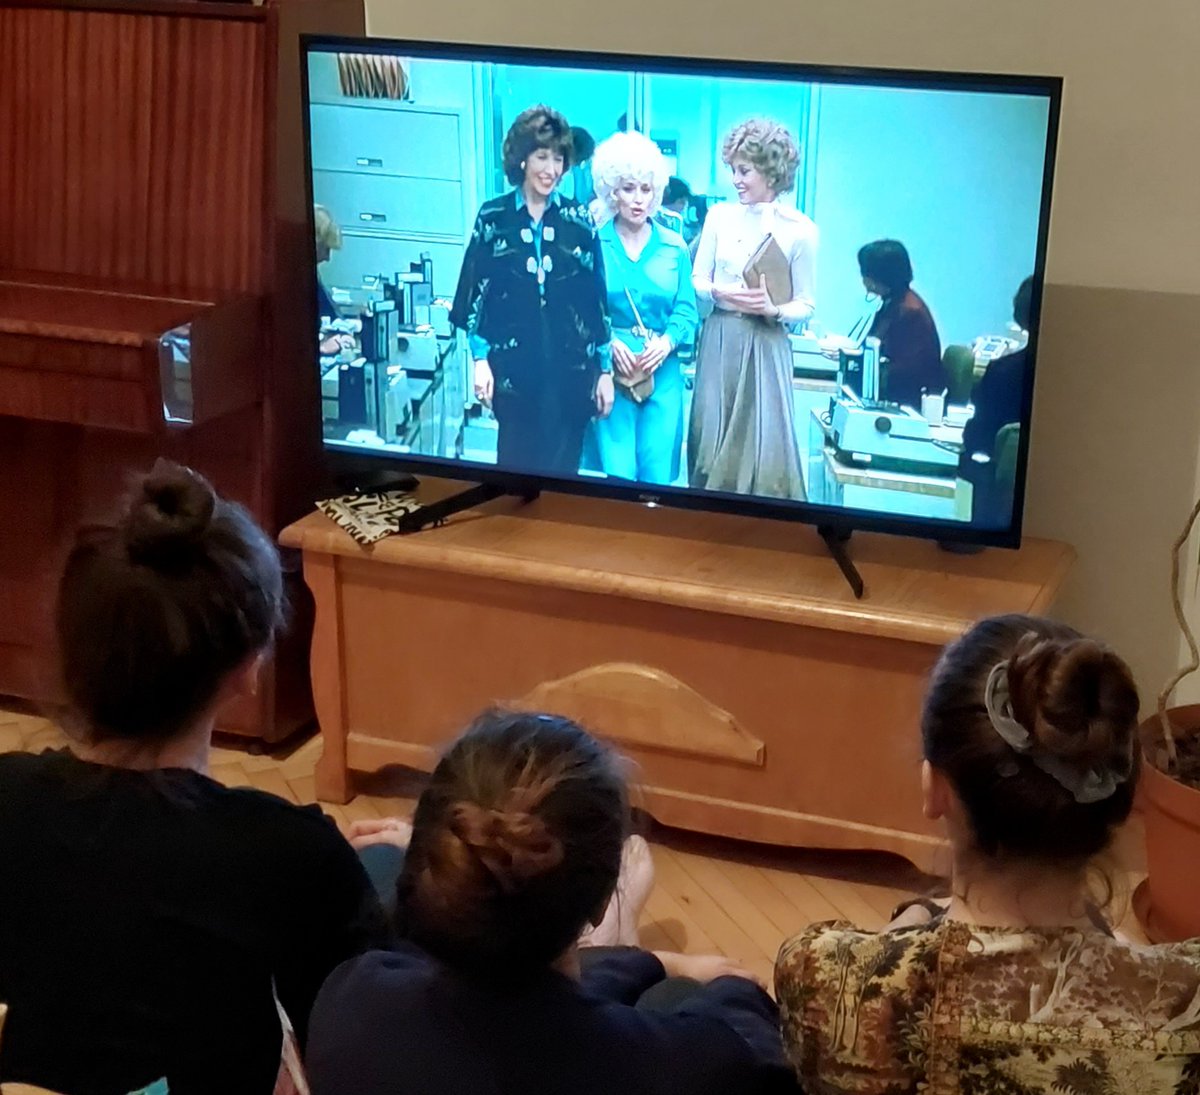 Another generation of 9to5 workers getting inspired by the amazing @LilyTomlin @Janefonda and @DollyParton #9to5 #stillworking9to5